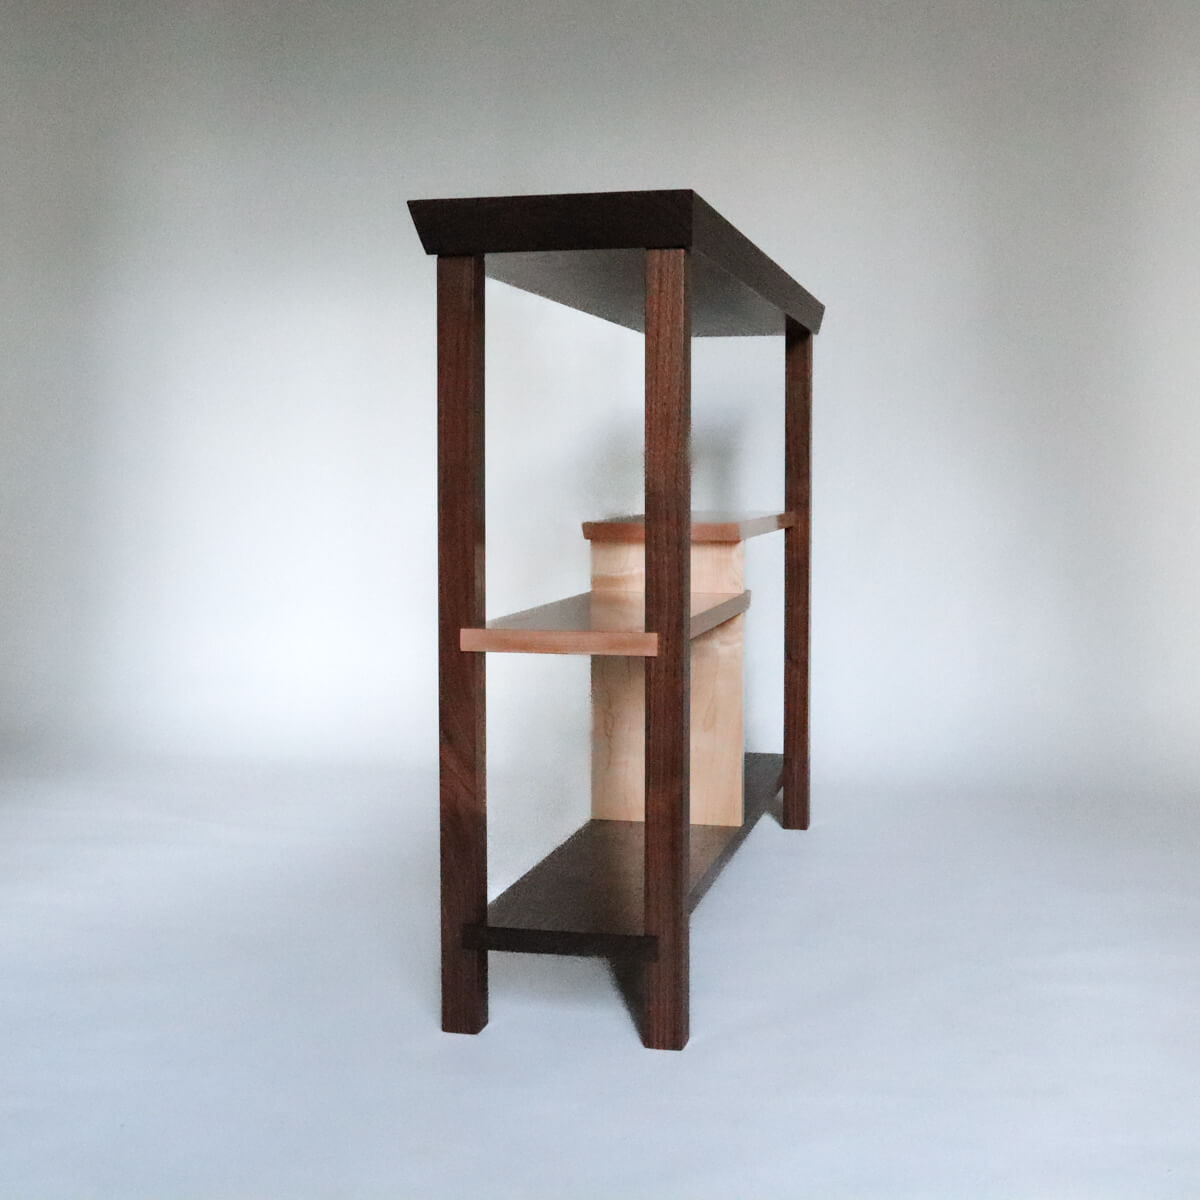 A Japanese style console table with shelves for books by Mokuzai Furniture